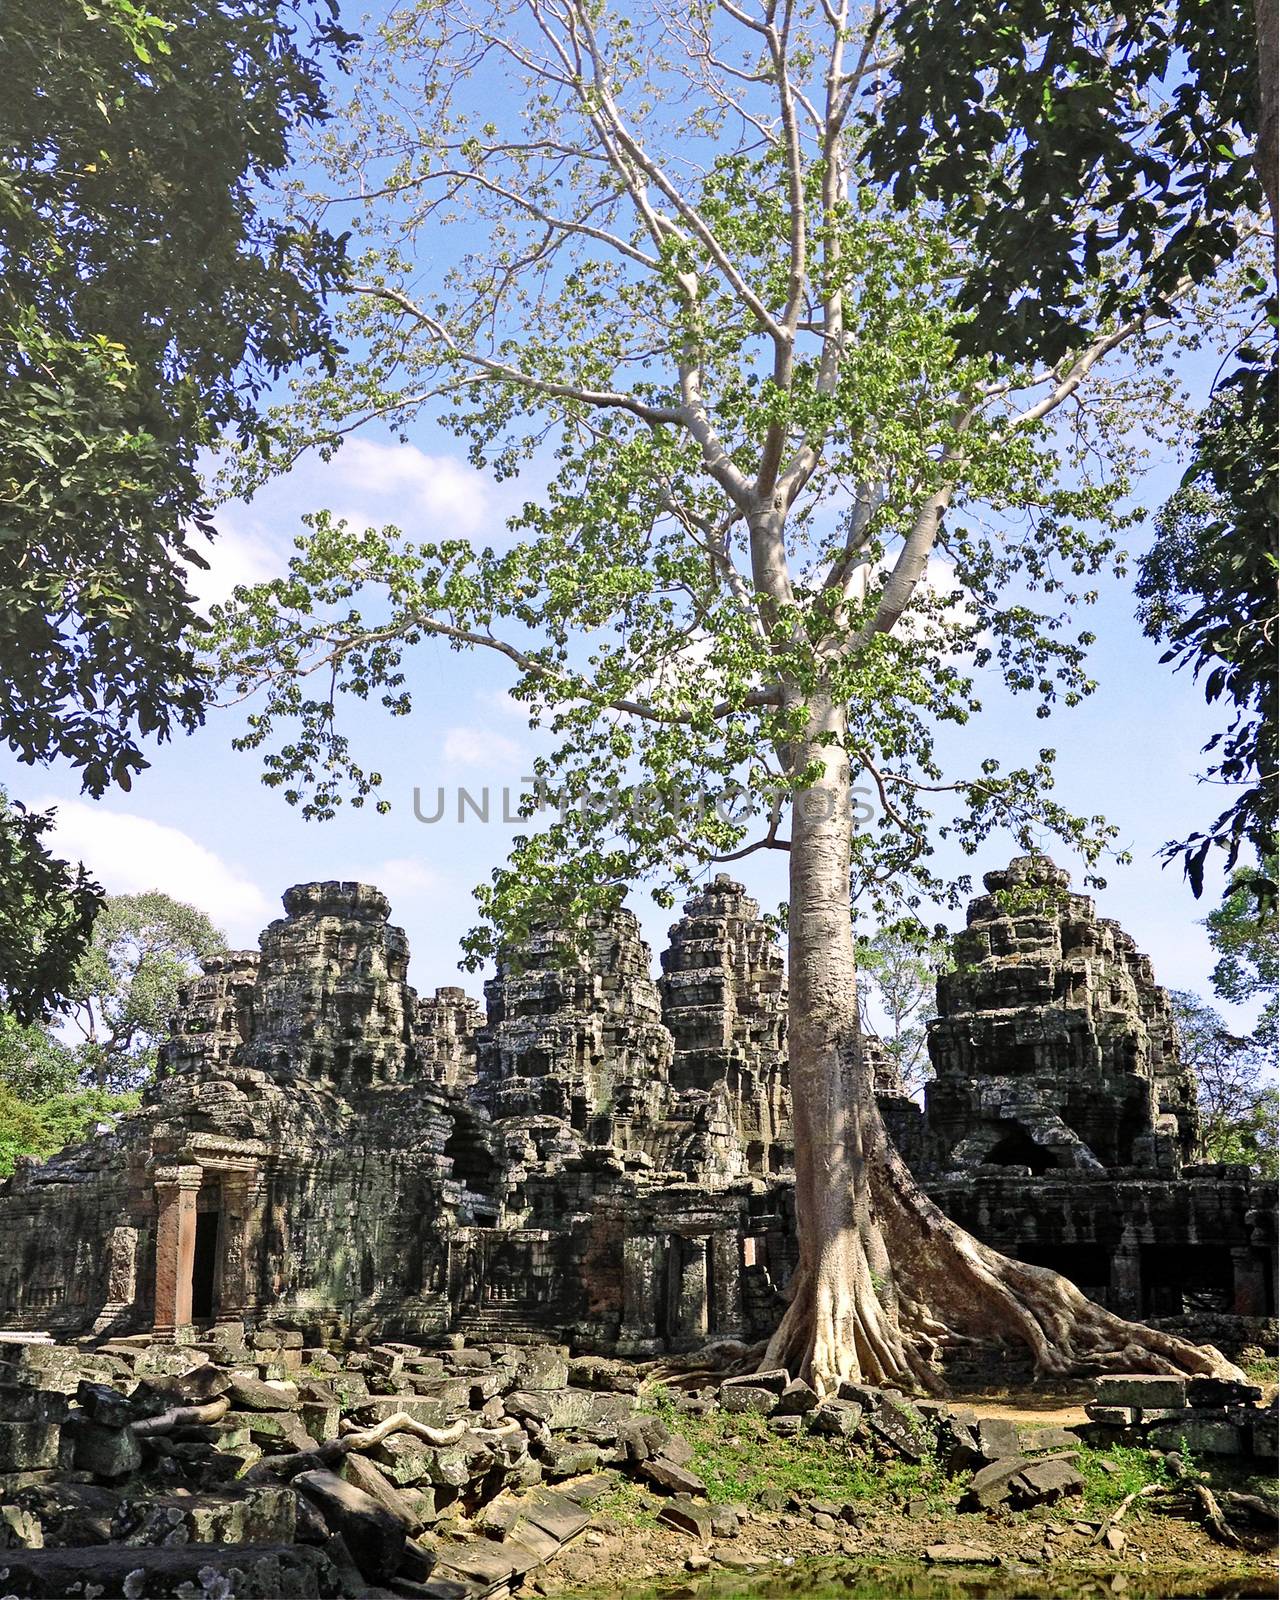 Banteay kdei temple in Angkor, Siem Reap, Cambodia. by orsor